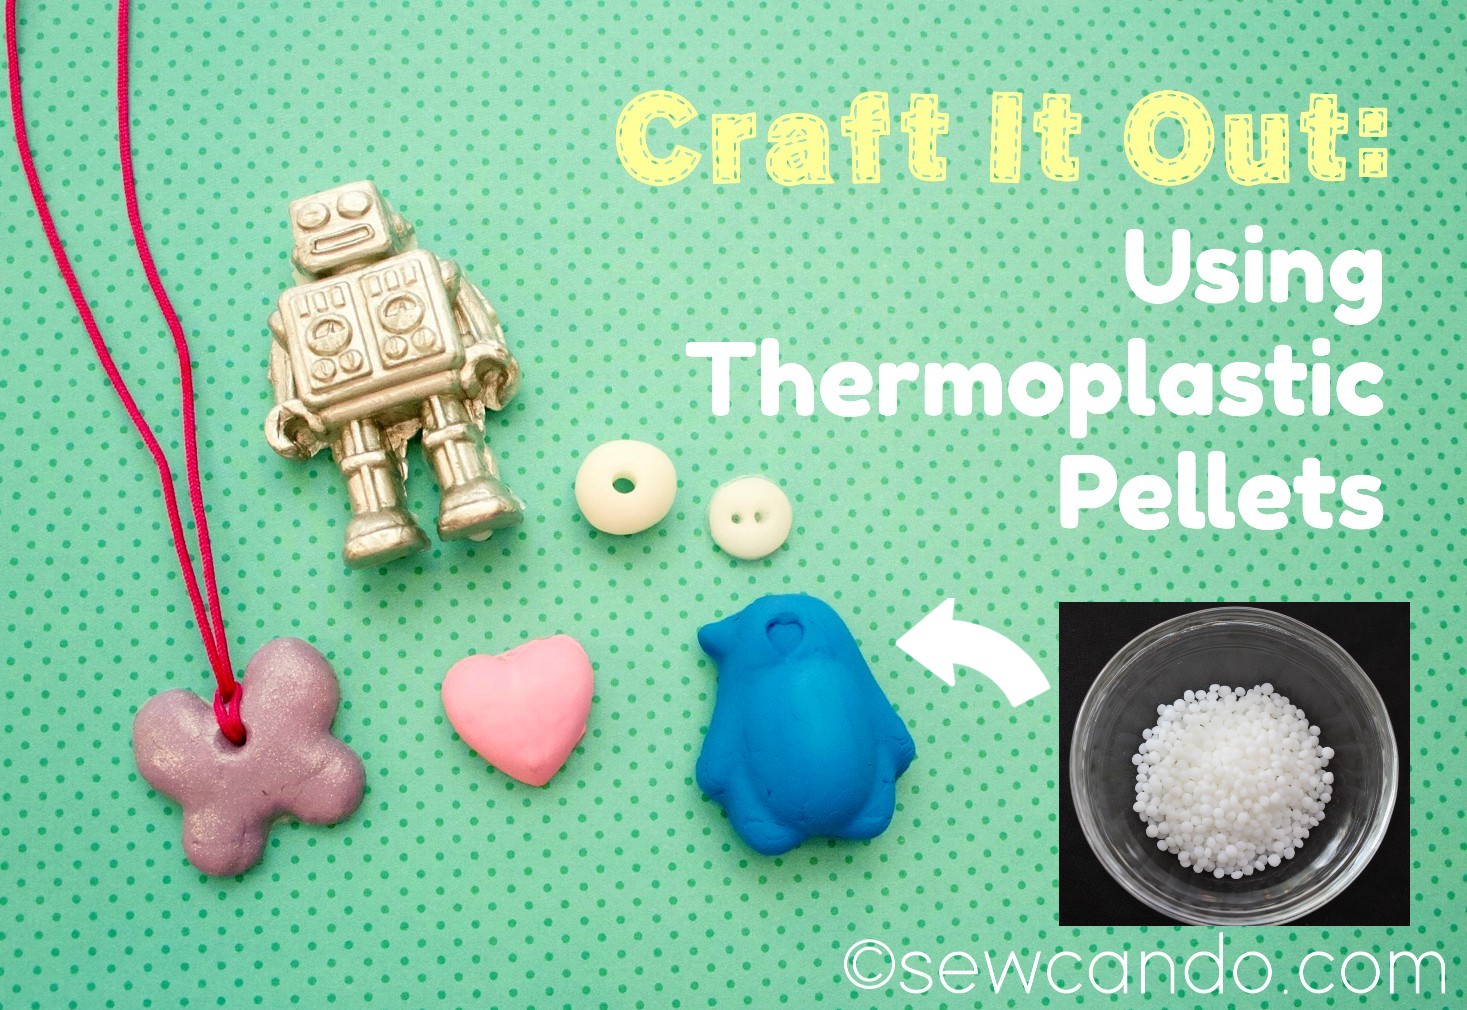 Sew Can Do: Craft It Out: Thermoplastic Pellets